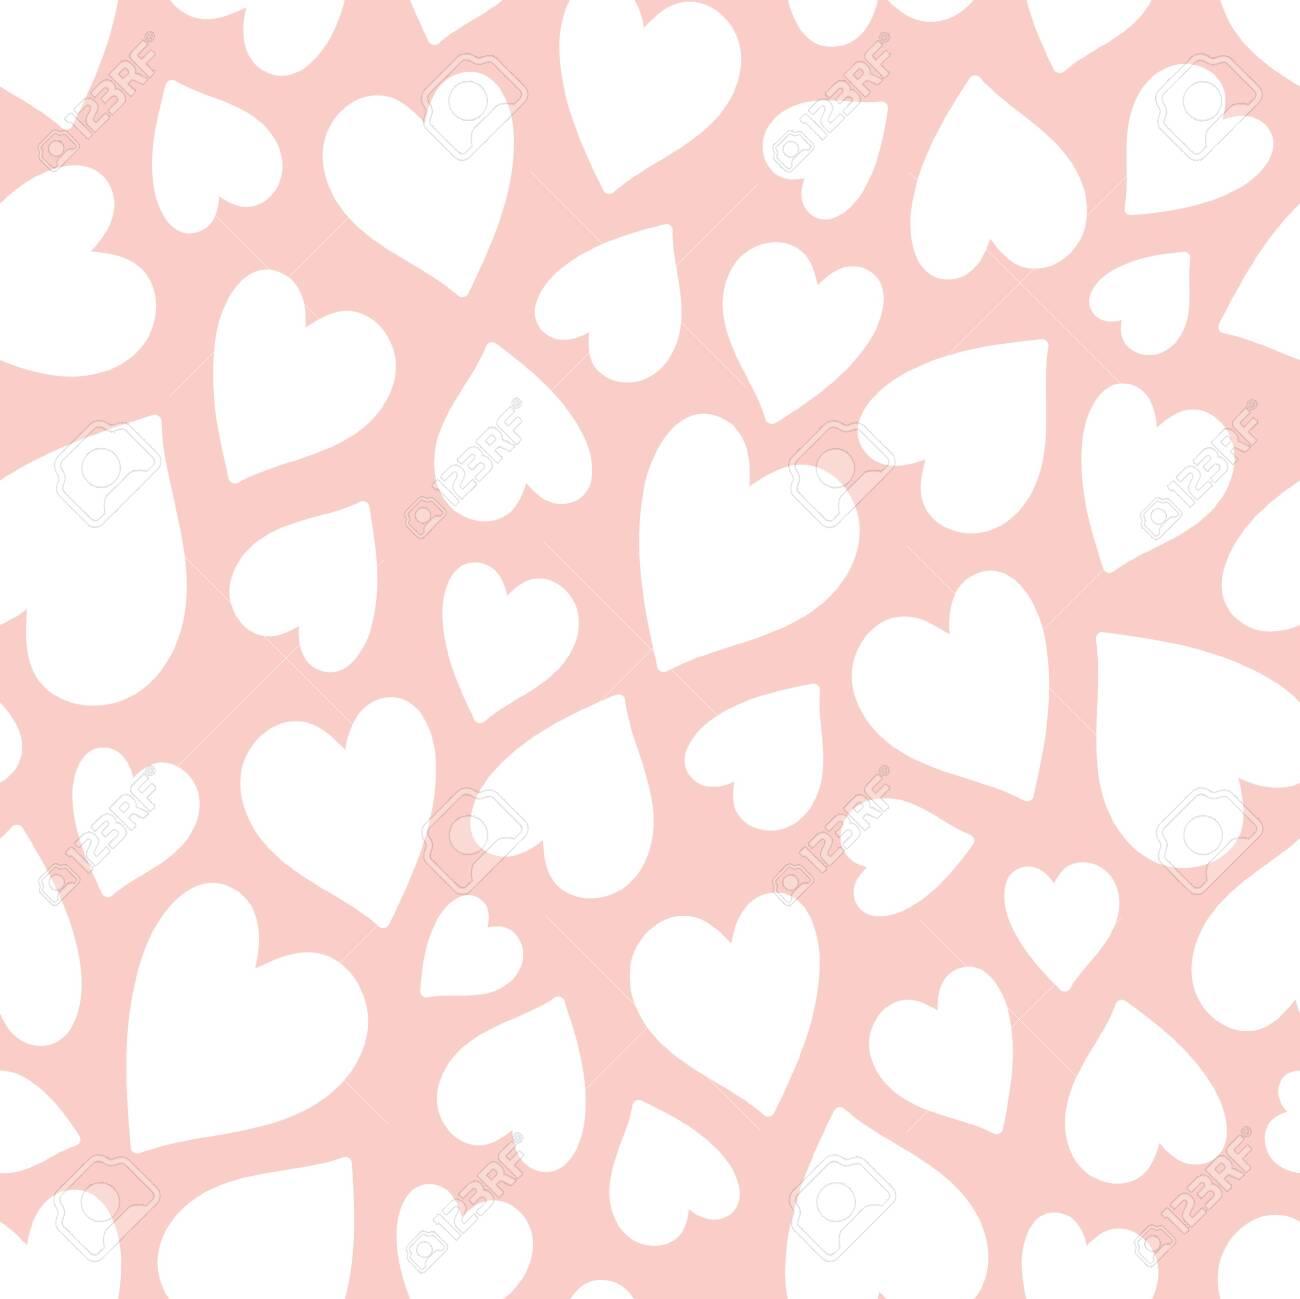 Cute White Hearts Seamless Pattern For Valentine S Day On Pale